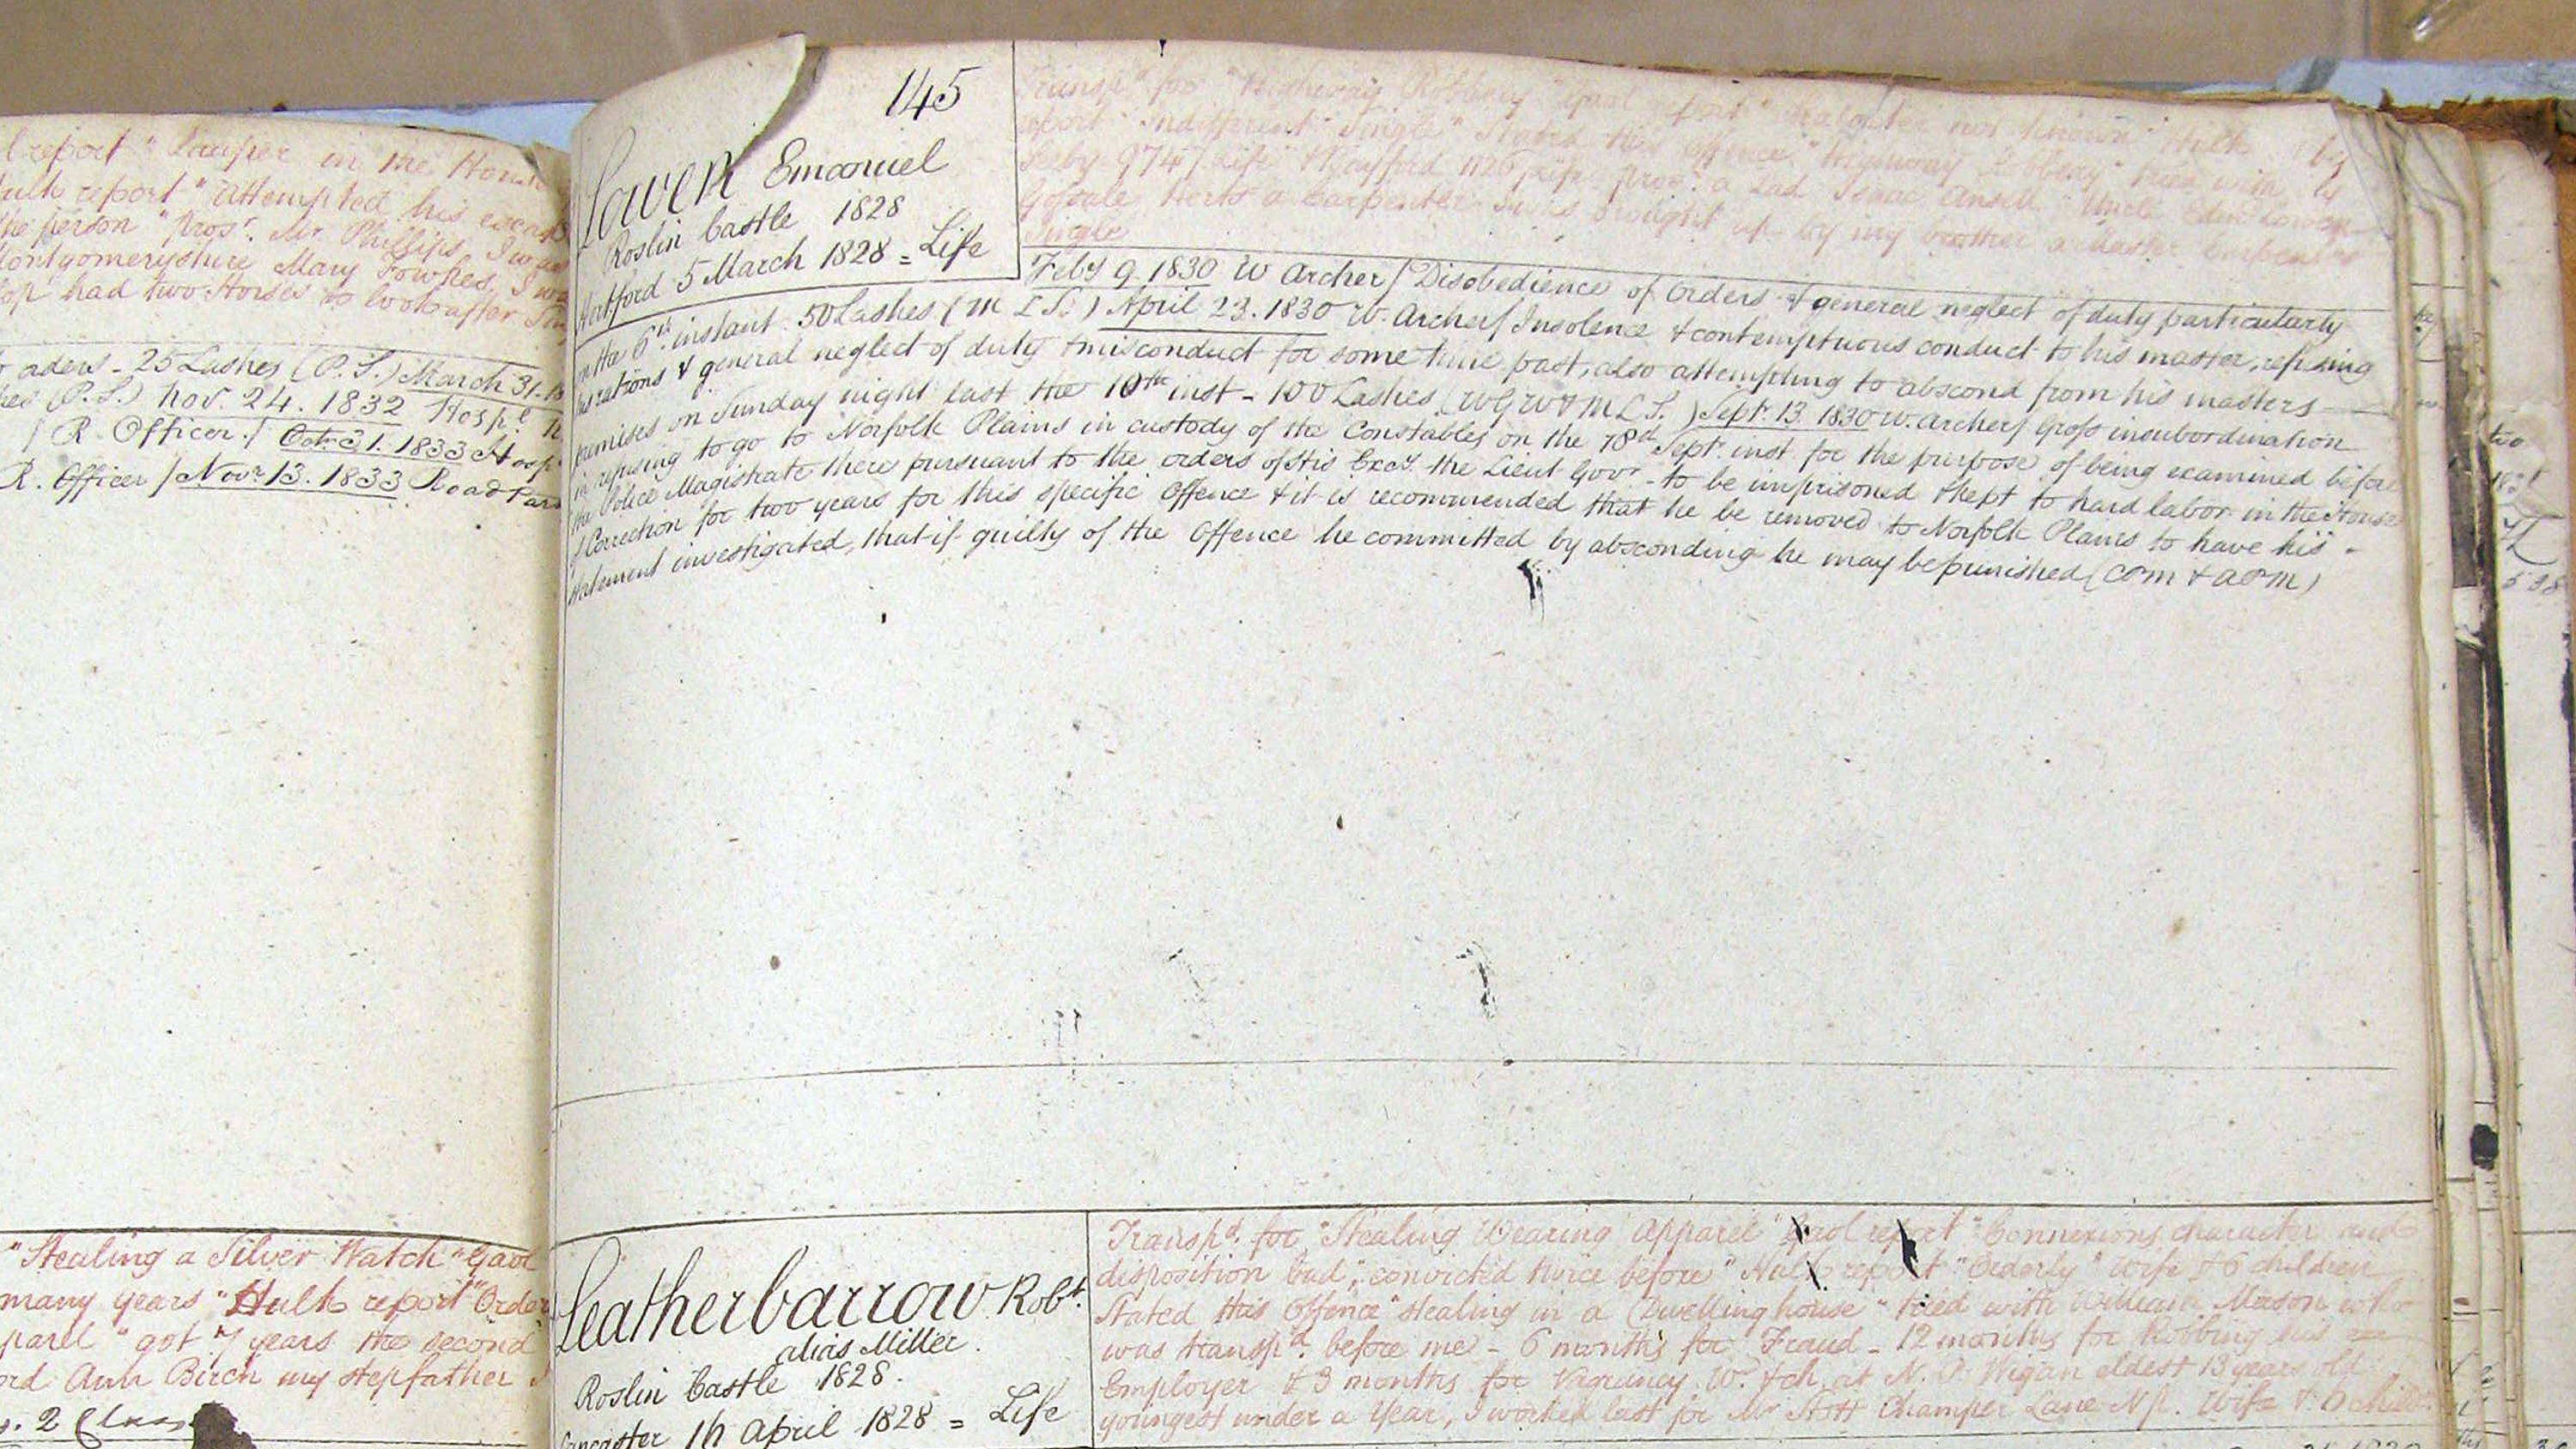 Excerpt from ledgers held as part of Brickendon Estate’s archives mentioning Emanuel Lowen.